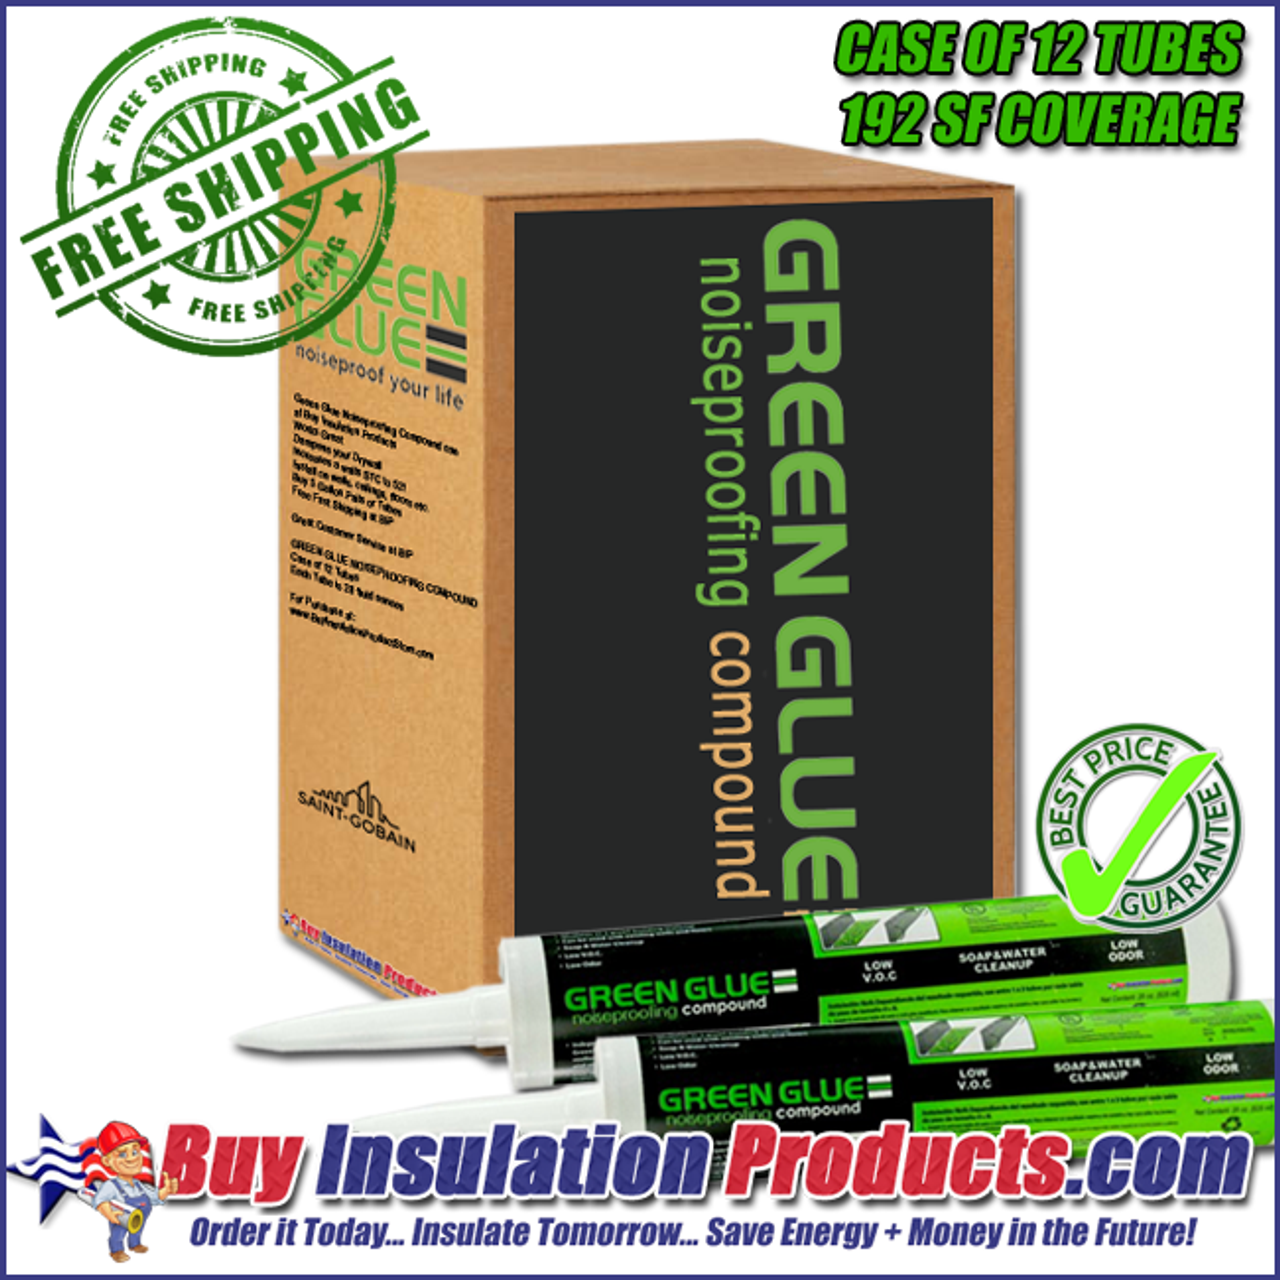 Green Glue Noiseproofing Compound (Case of 12 Tubes)